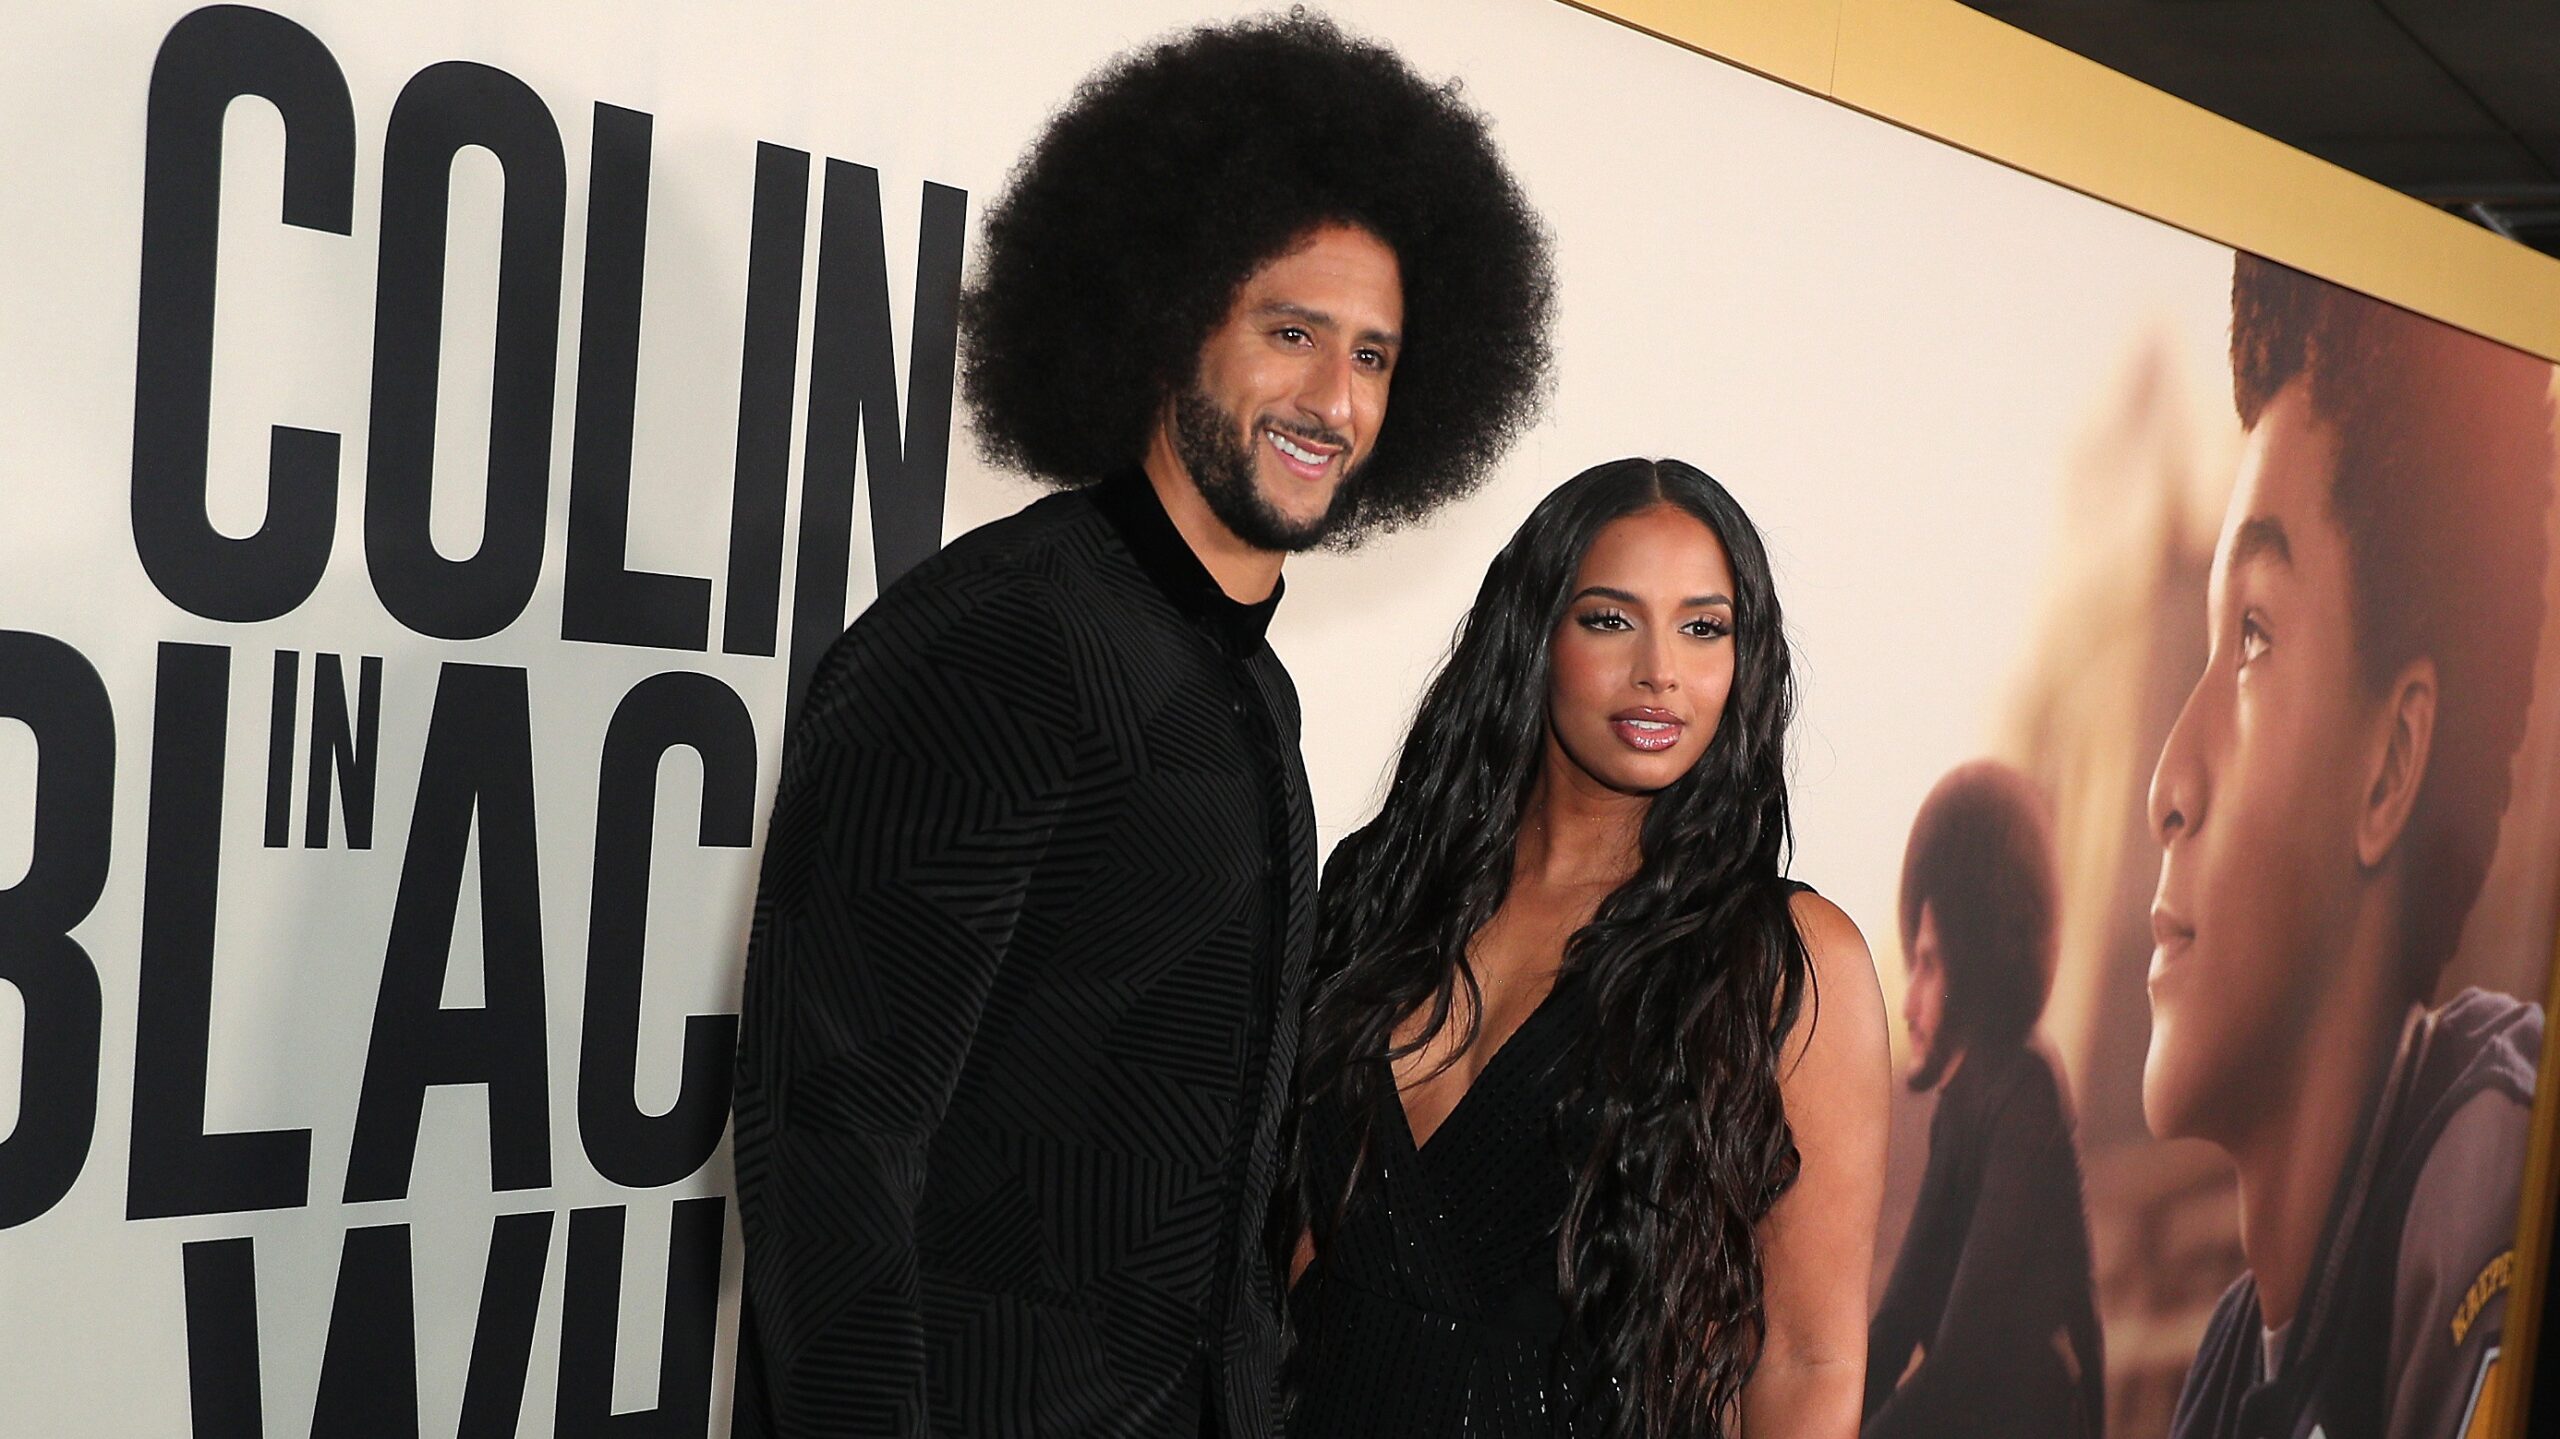 Colin Kaepernick and Nessa Nitty Welcome Their First Child: “We Are Over The Moon”